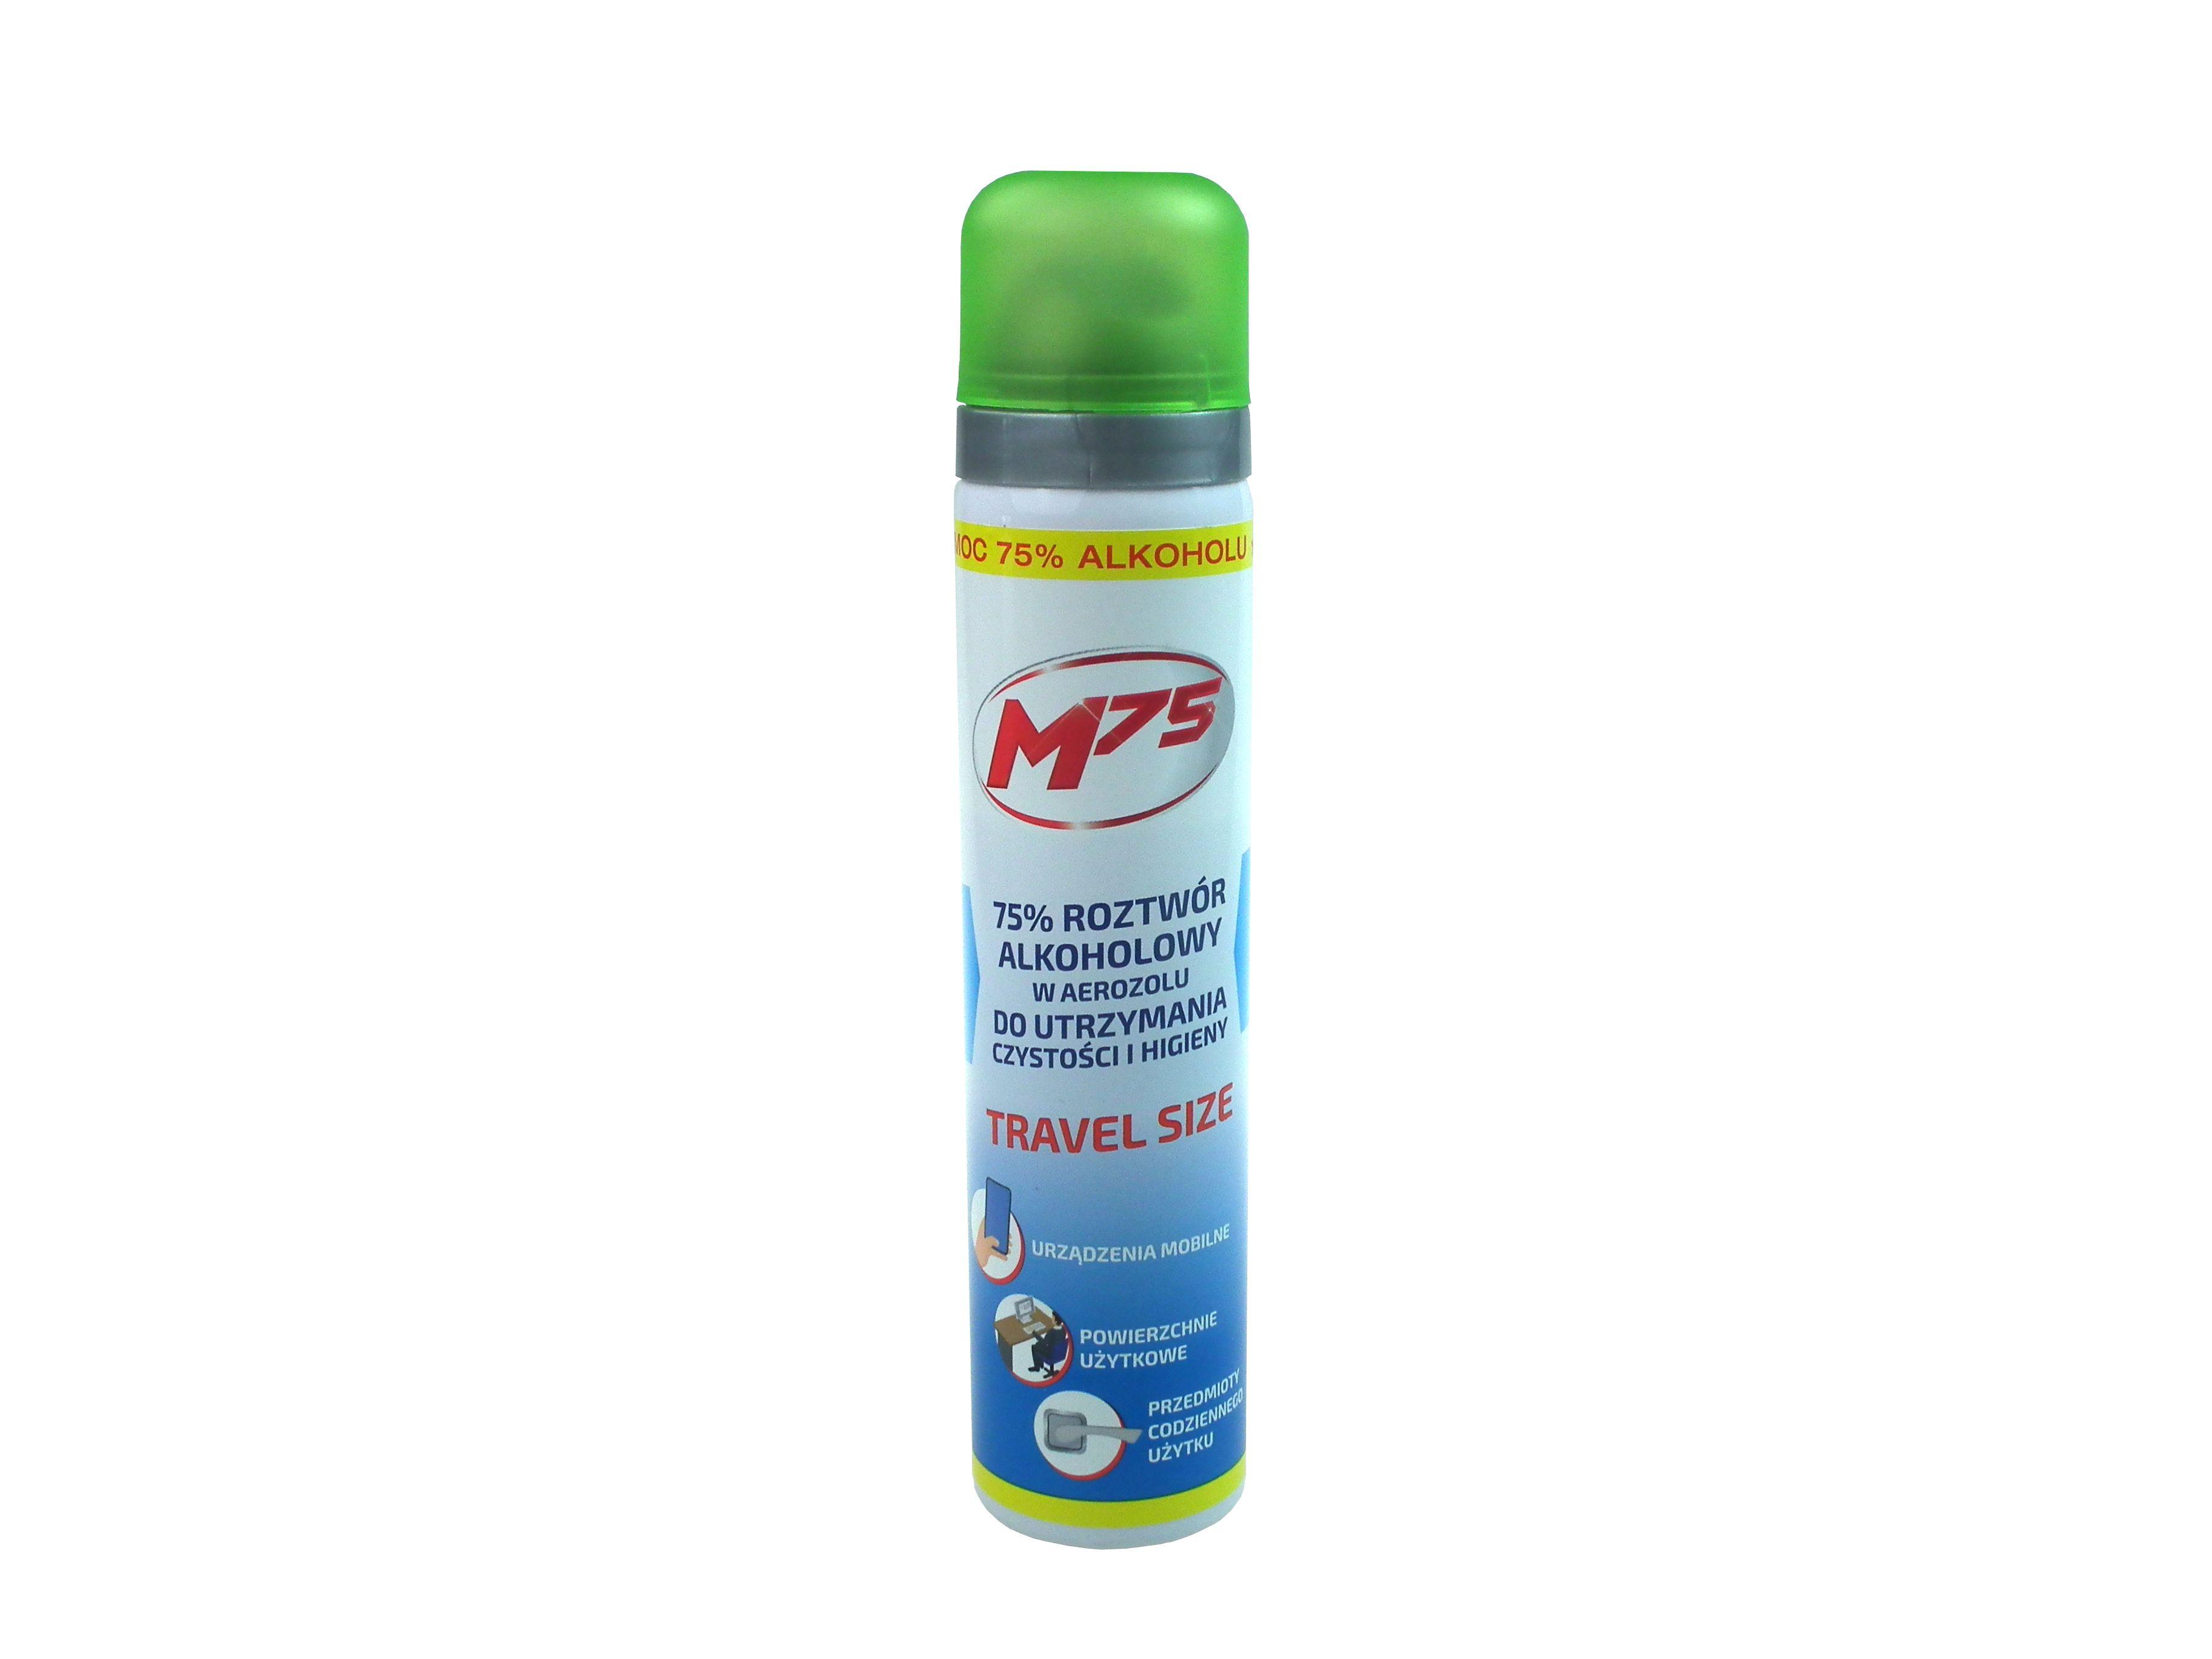 Alcohol solution in a spray 75% M75